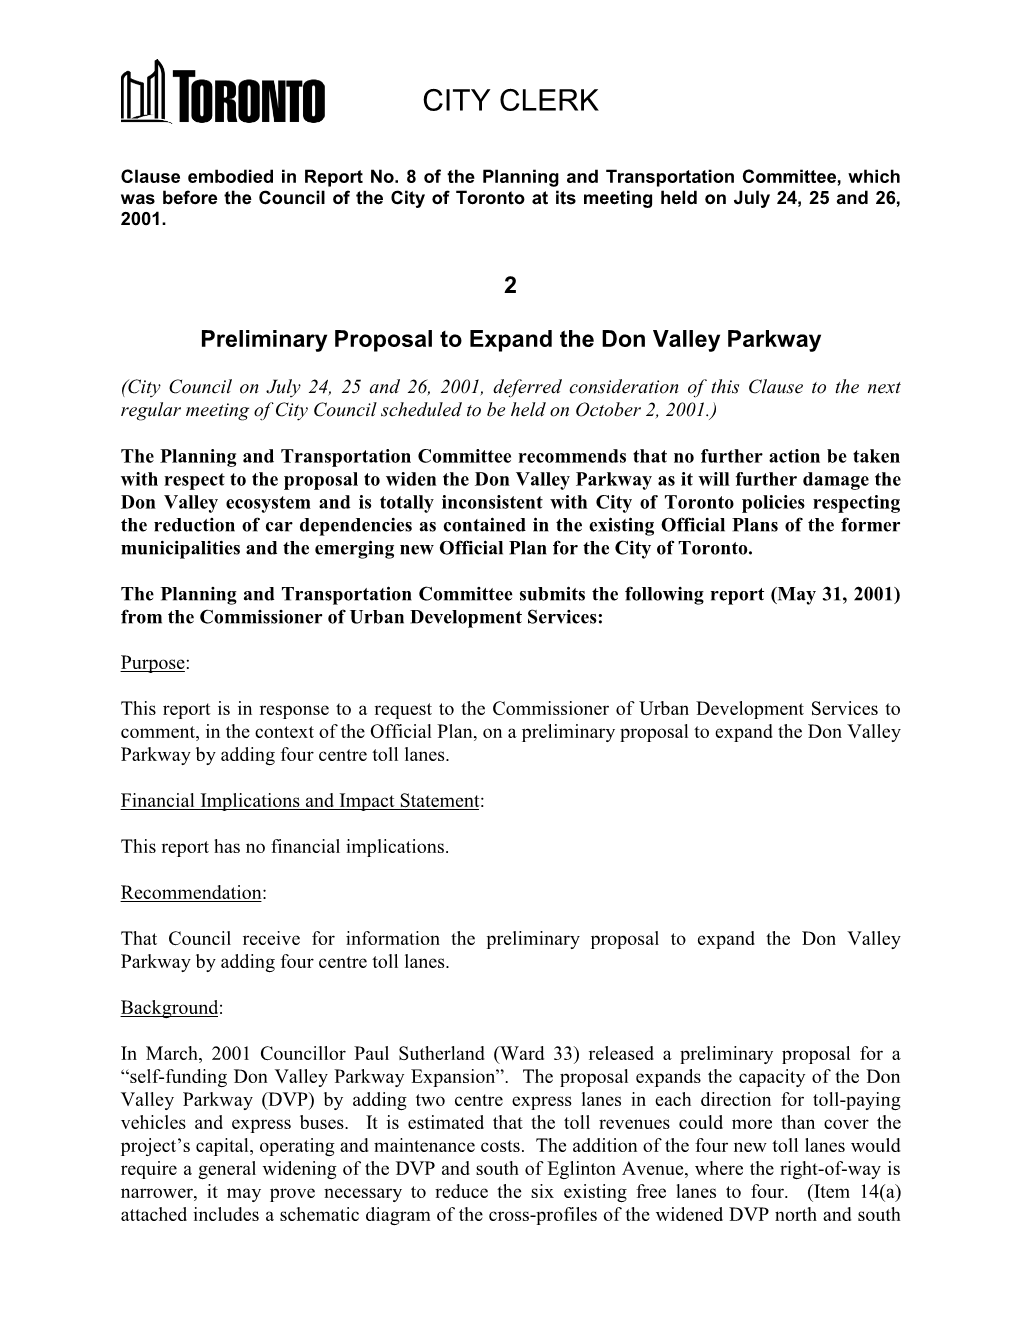 Preliminary Proposal to Expand the Don Valley Parkway